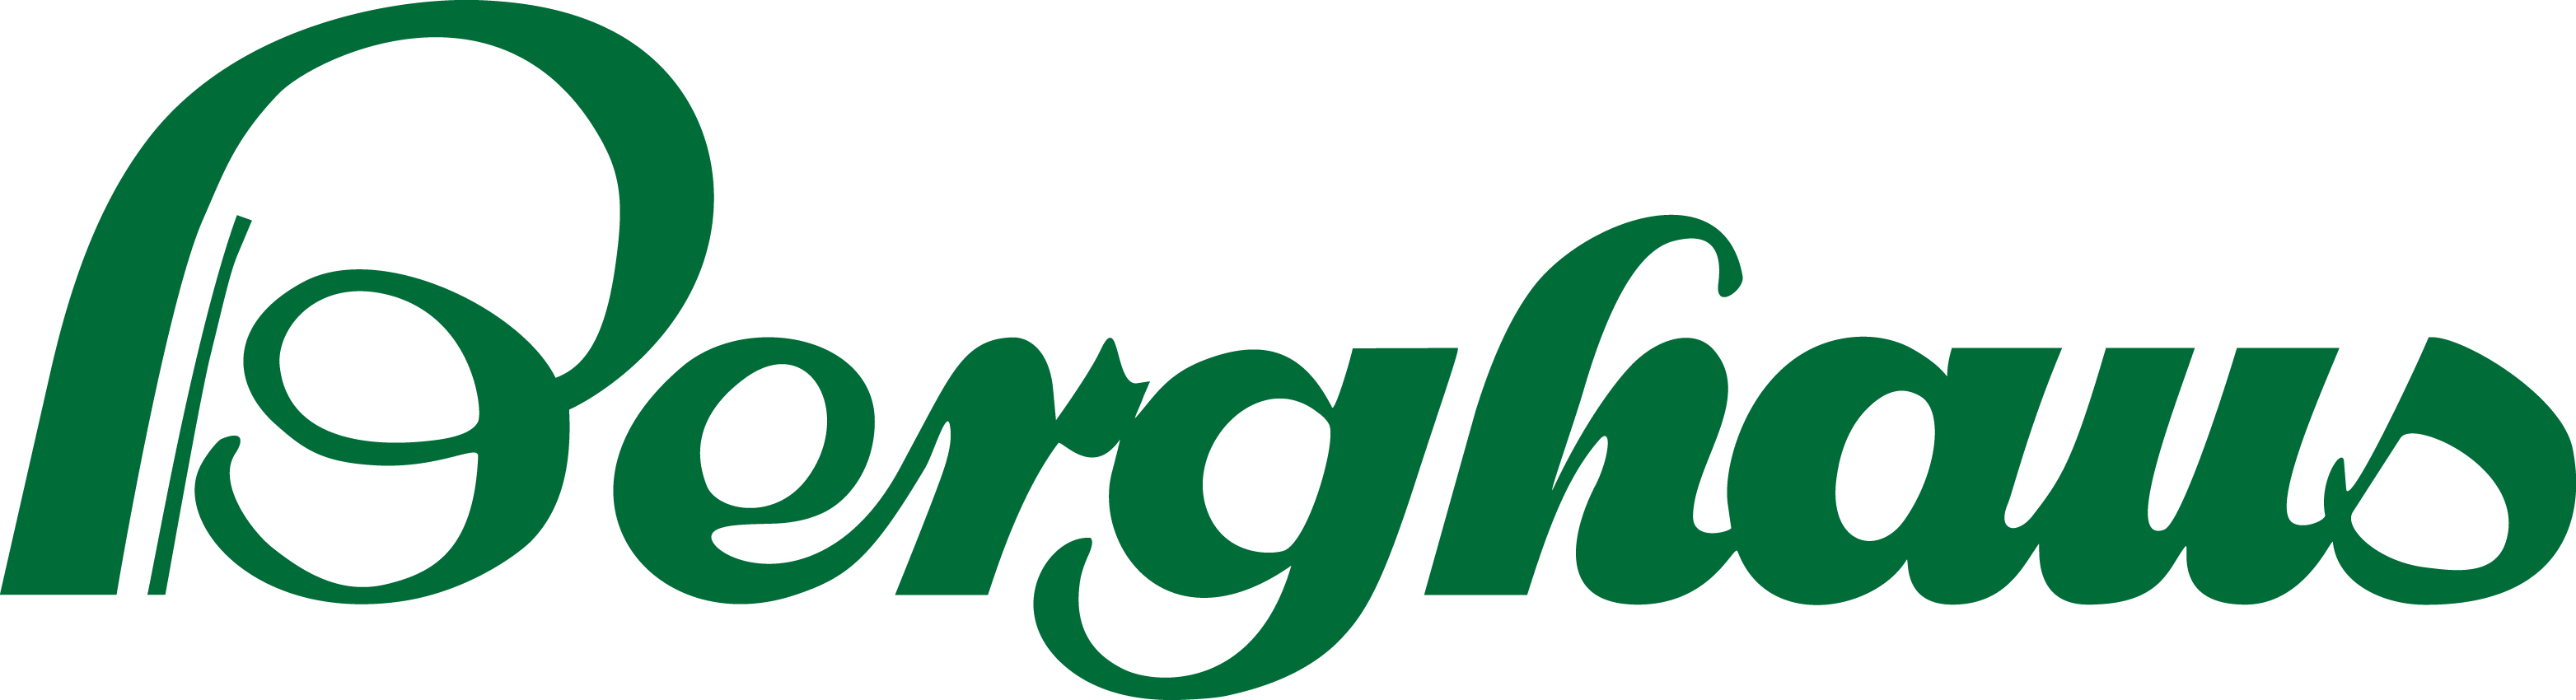 august_berghaus_gmbh_and_co_kg